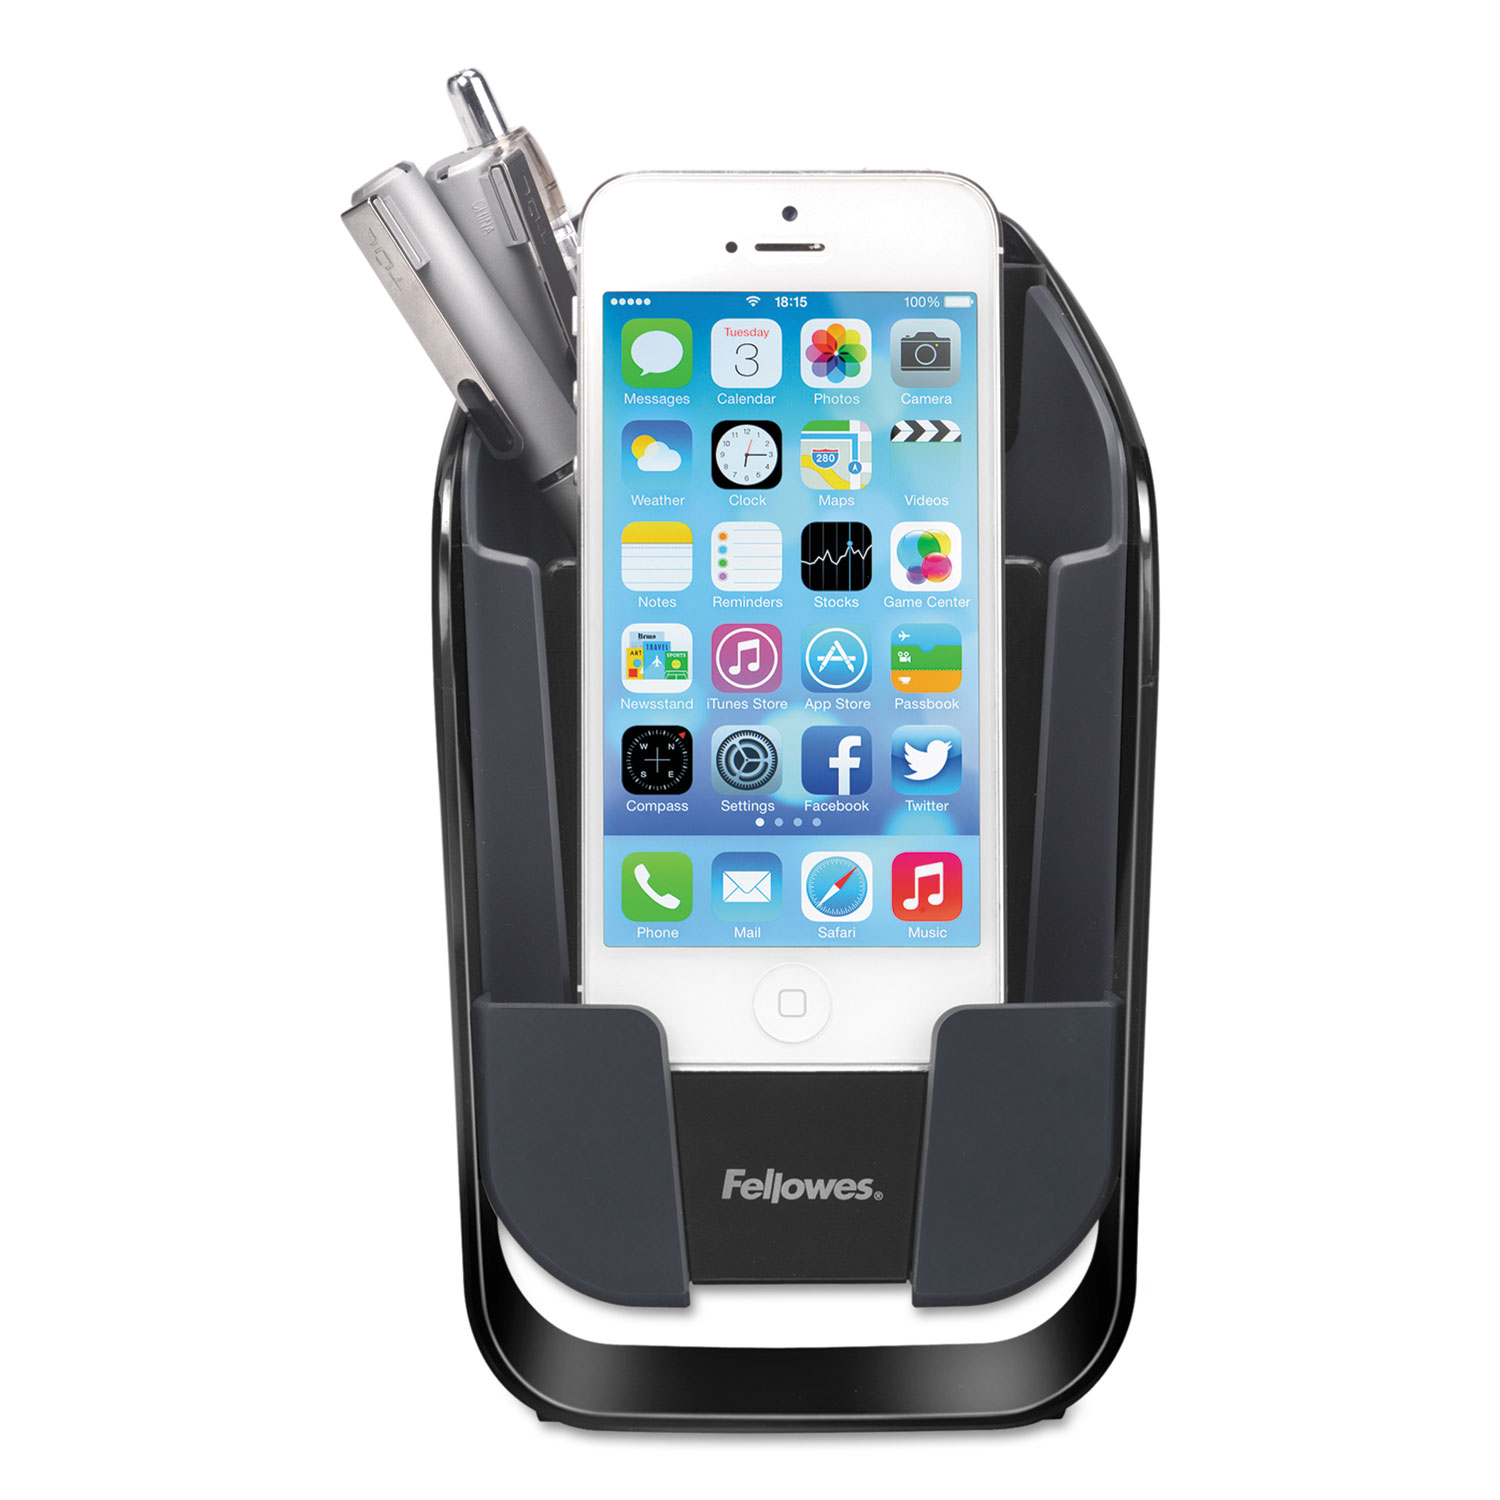 I-Spire Series Pencil and Phone Station, 3 7/8 x 5 3/8 x 5 1/2, Black/Gray